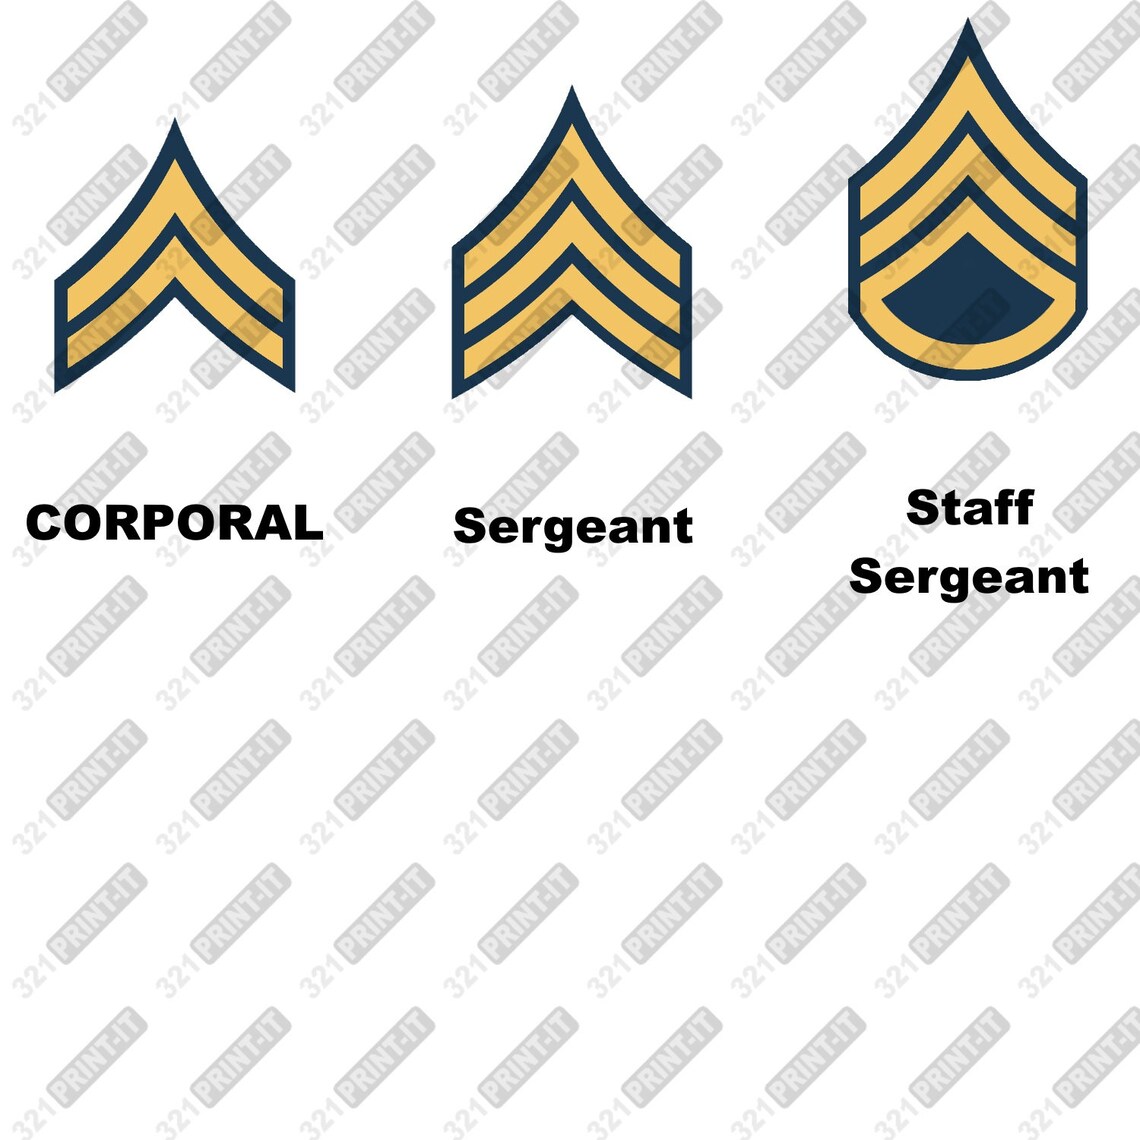 US Army Ranks digital file svg dxf eps jpg and png. | Etsy